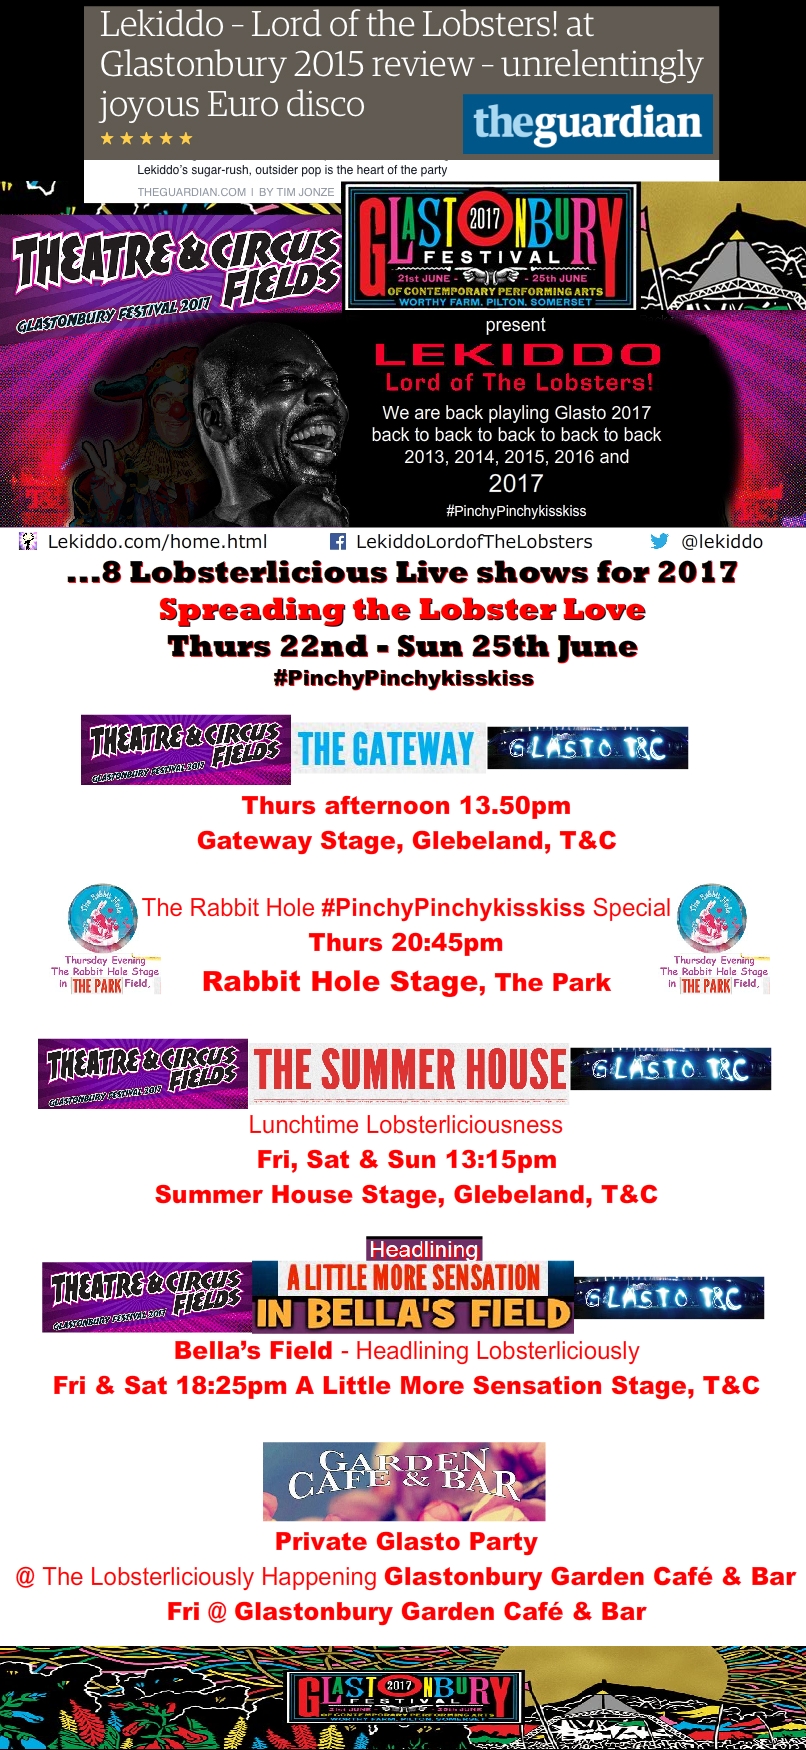 LEKIDDO - Lord of The Lobsters! returns to Glastonbury Festival 2017 with 8 Lobsterlicious live shows #PinchyPinchykisskiss